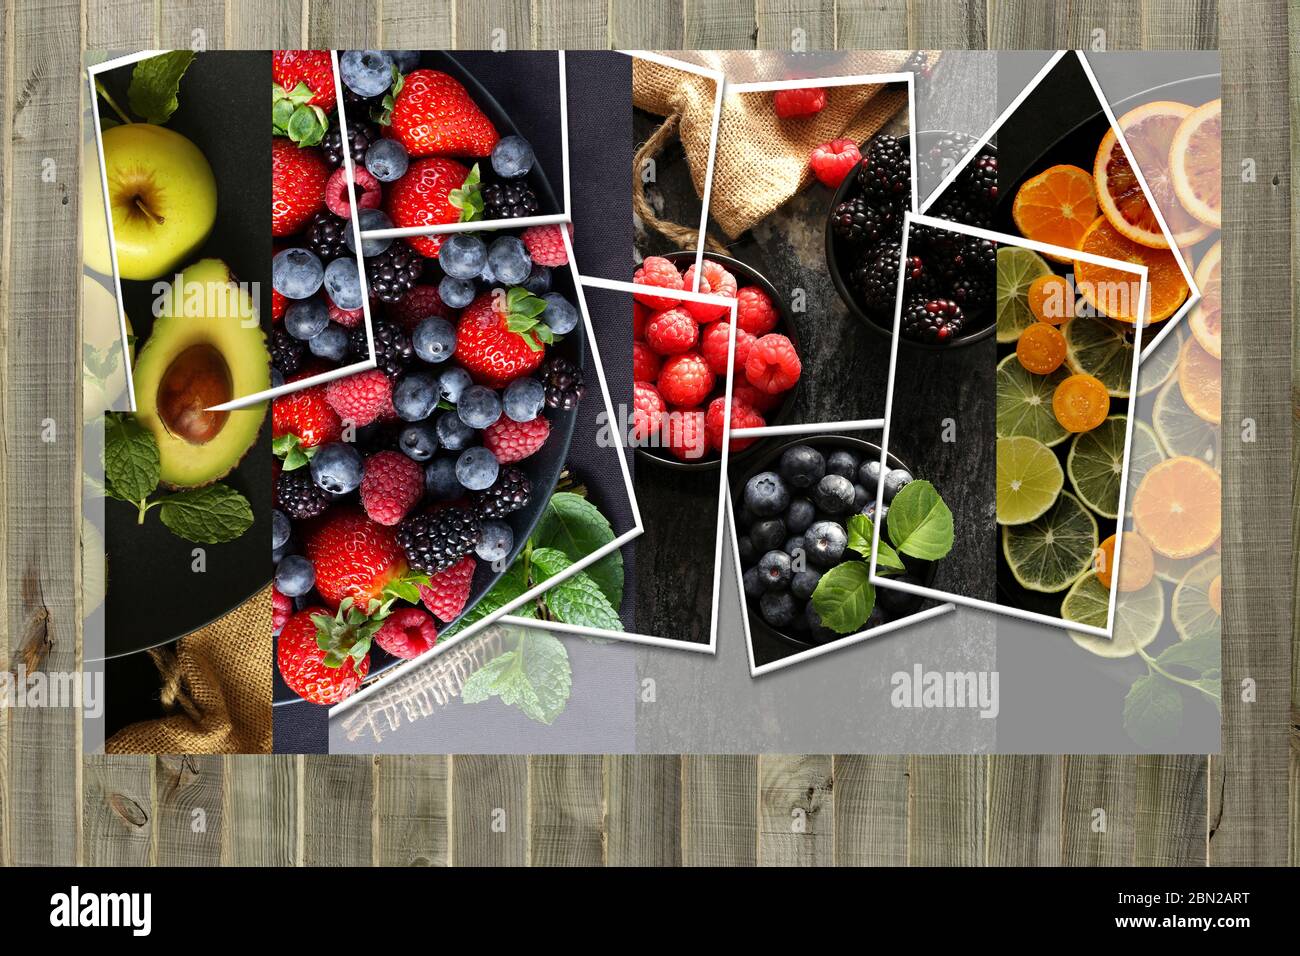 Collage of summer fruits and berries on wooden background. Healthy, vegetarian food concept. Mock up Stock Photo